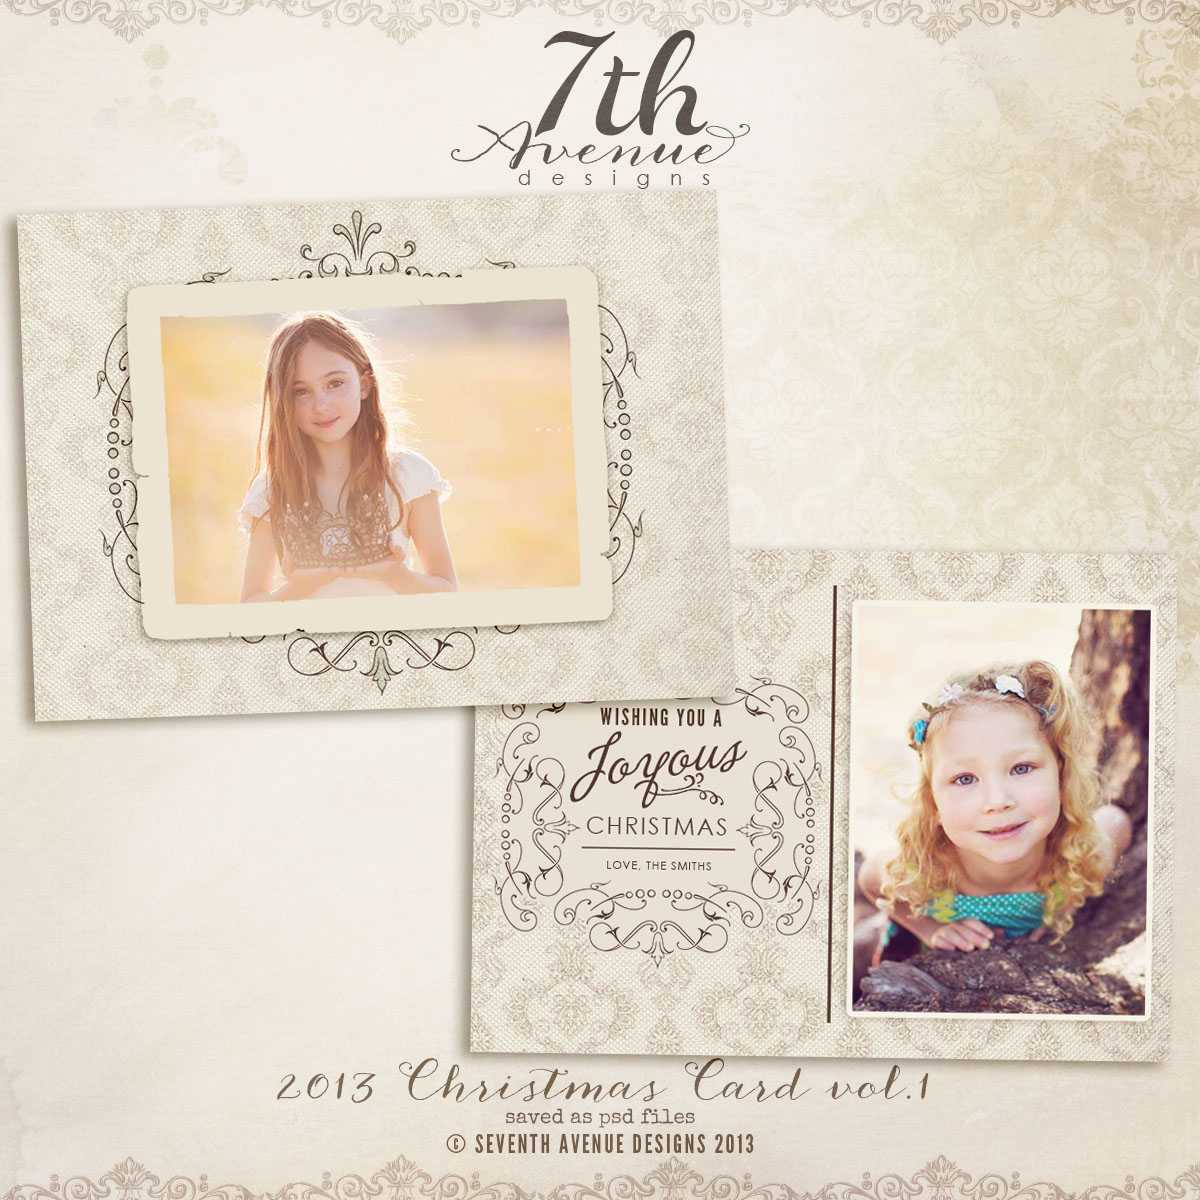 All Products : 7Thavenue Designs :: Logo And Templates Within Free Photoshop Christmas Card Templates For Photographers